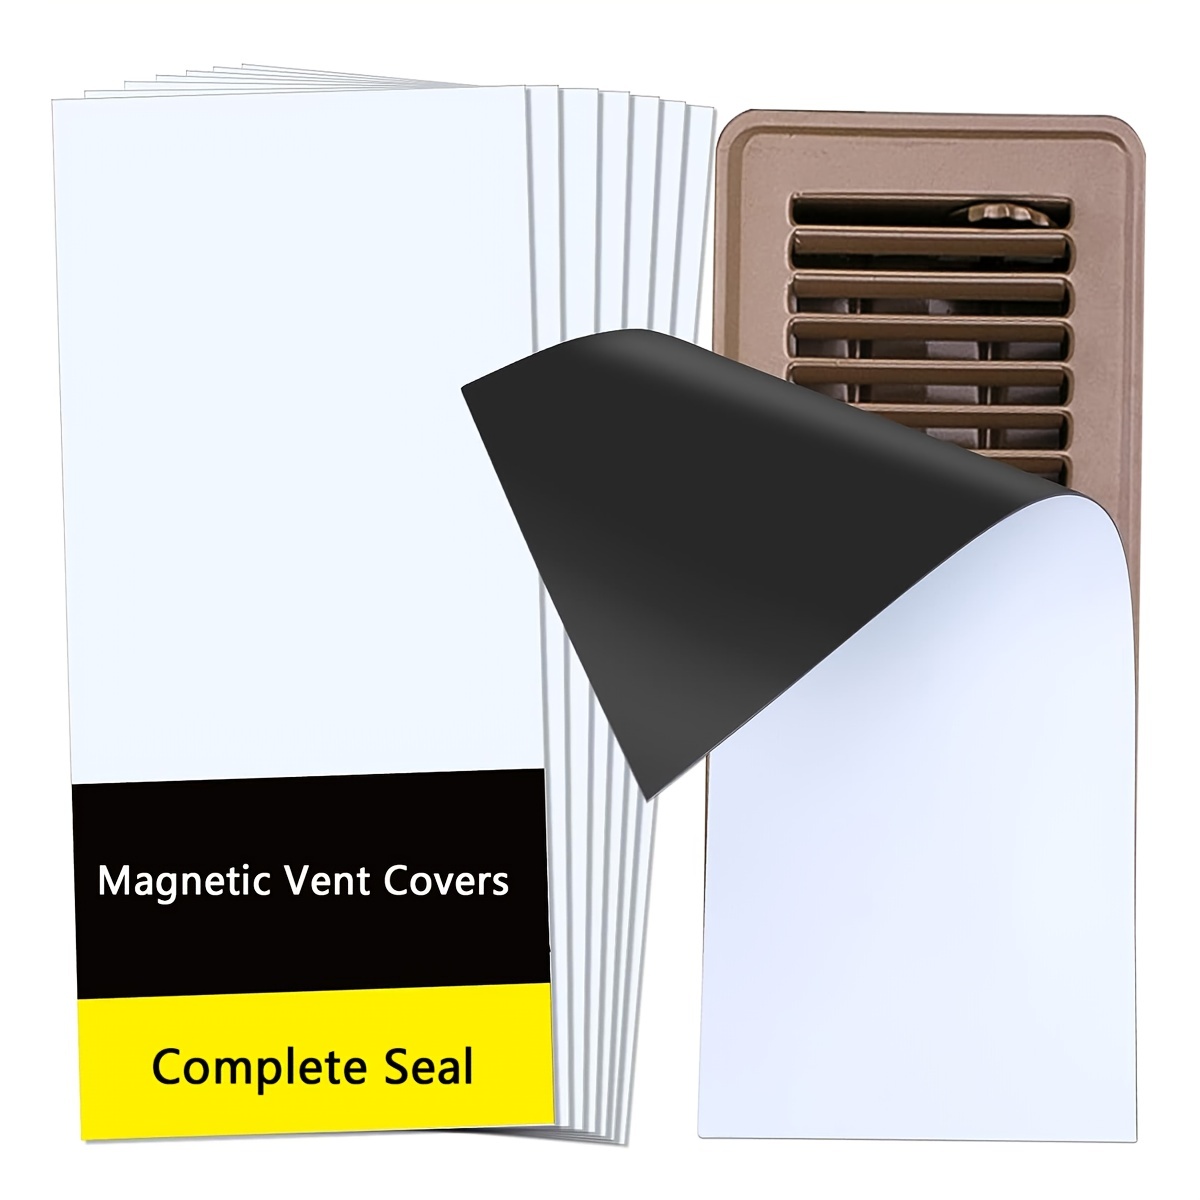 Magnetic Register Vent Cover Vent Cover For Ceiling Sidewall And Floor Vents  Strong Magnetic Covers For RV Home HVAC AC And - AliExpress